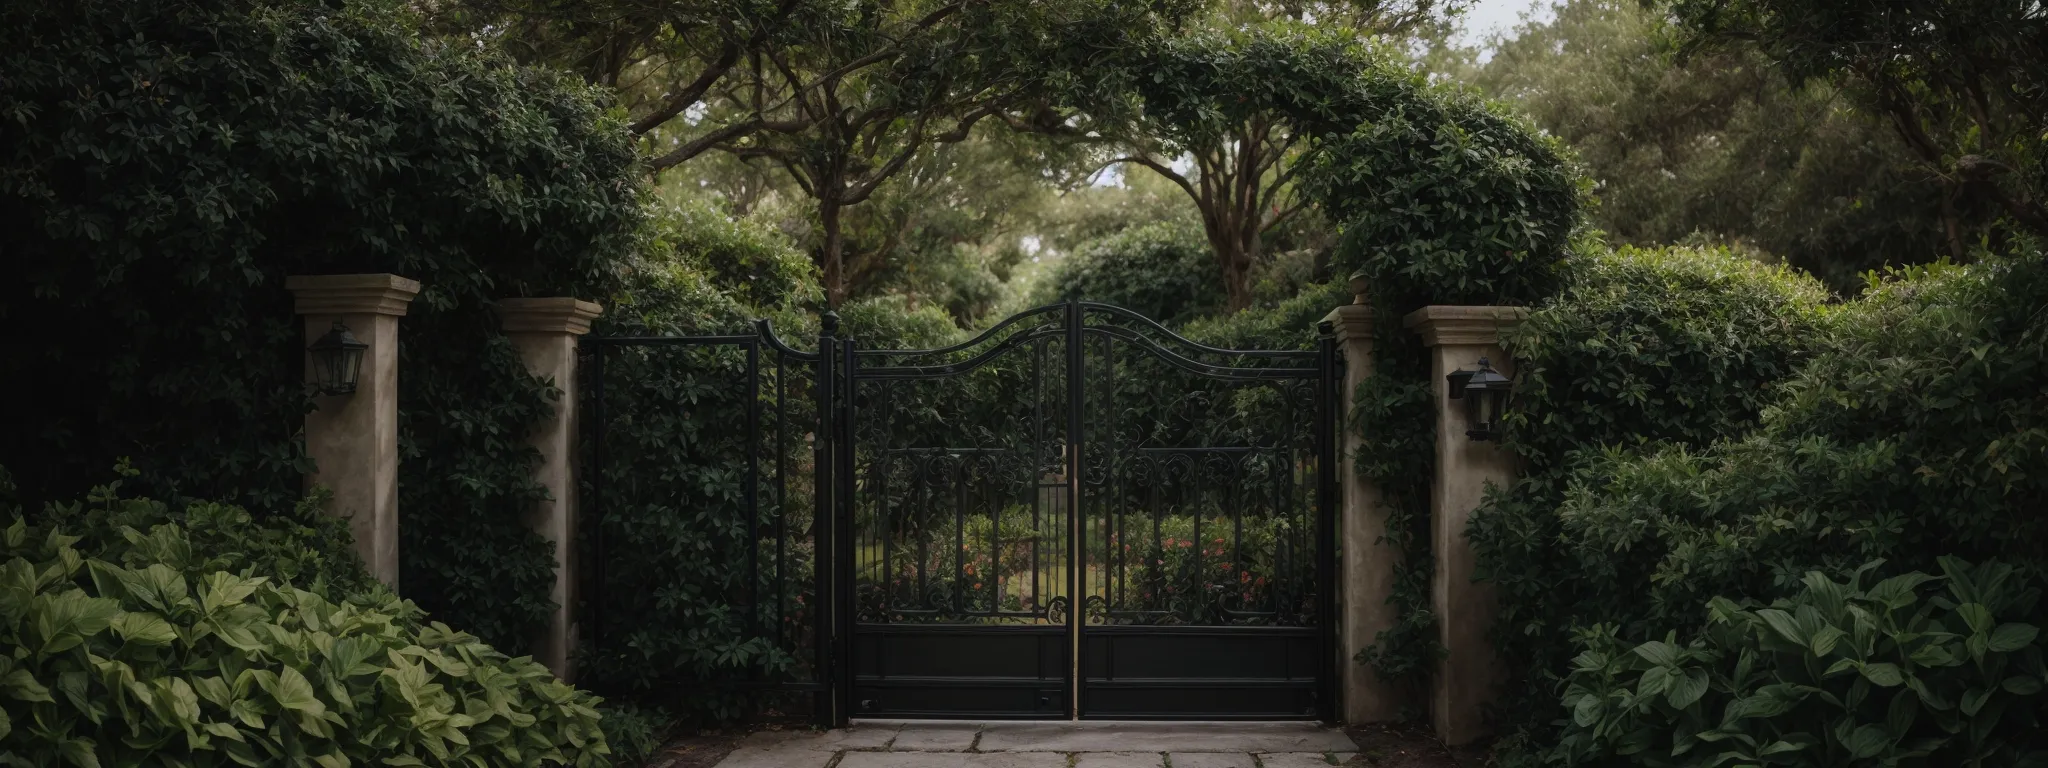 a closed metal gate within a lush garden pathway, symbolizing exclusive members-only access while hinting at the underlying structure for optimized navigation.